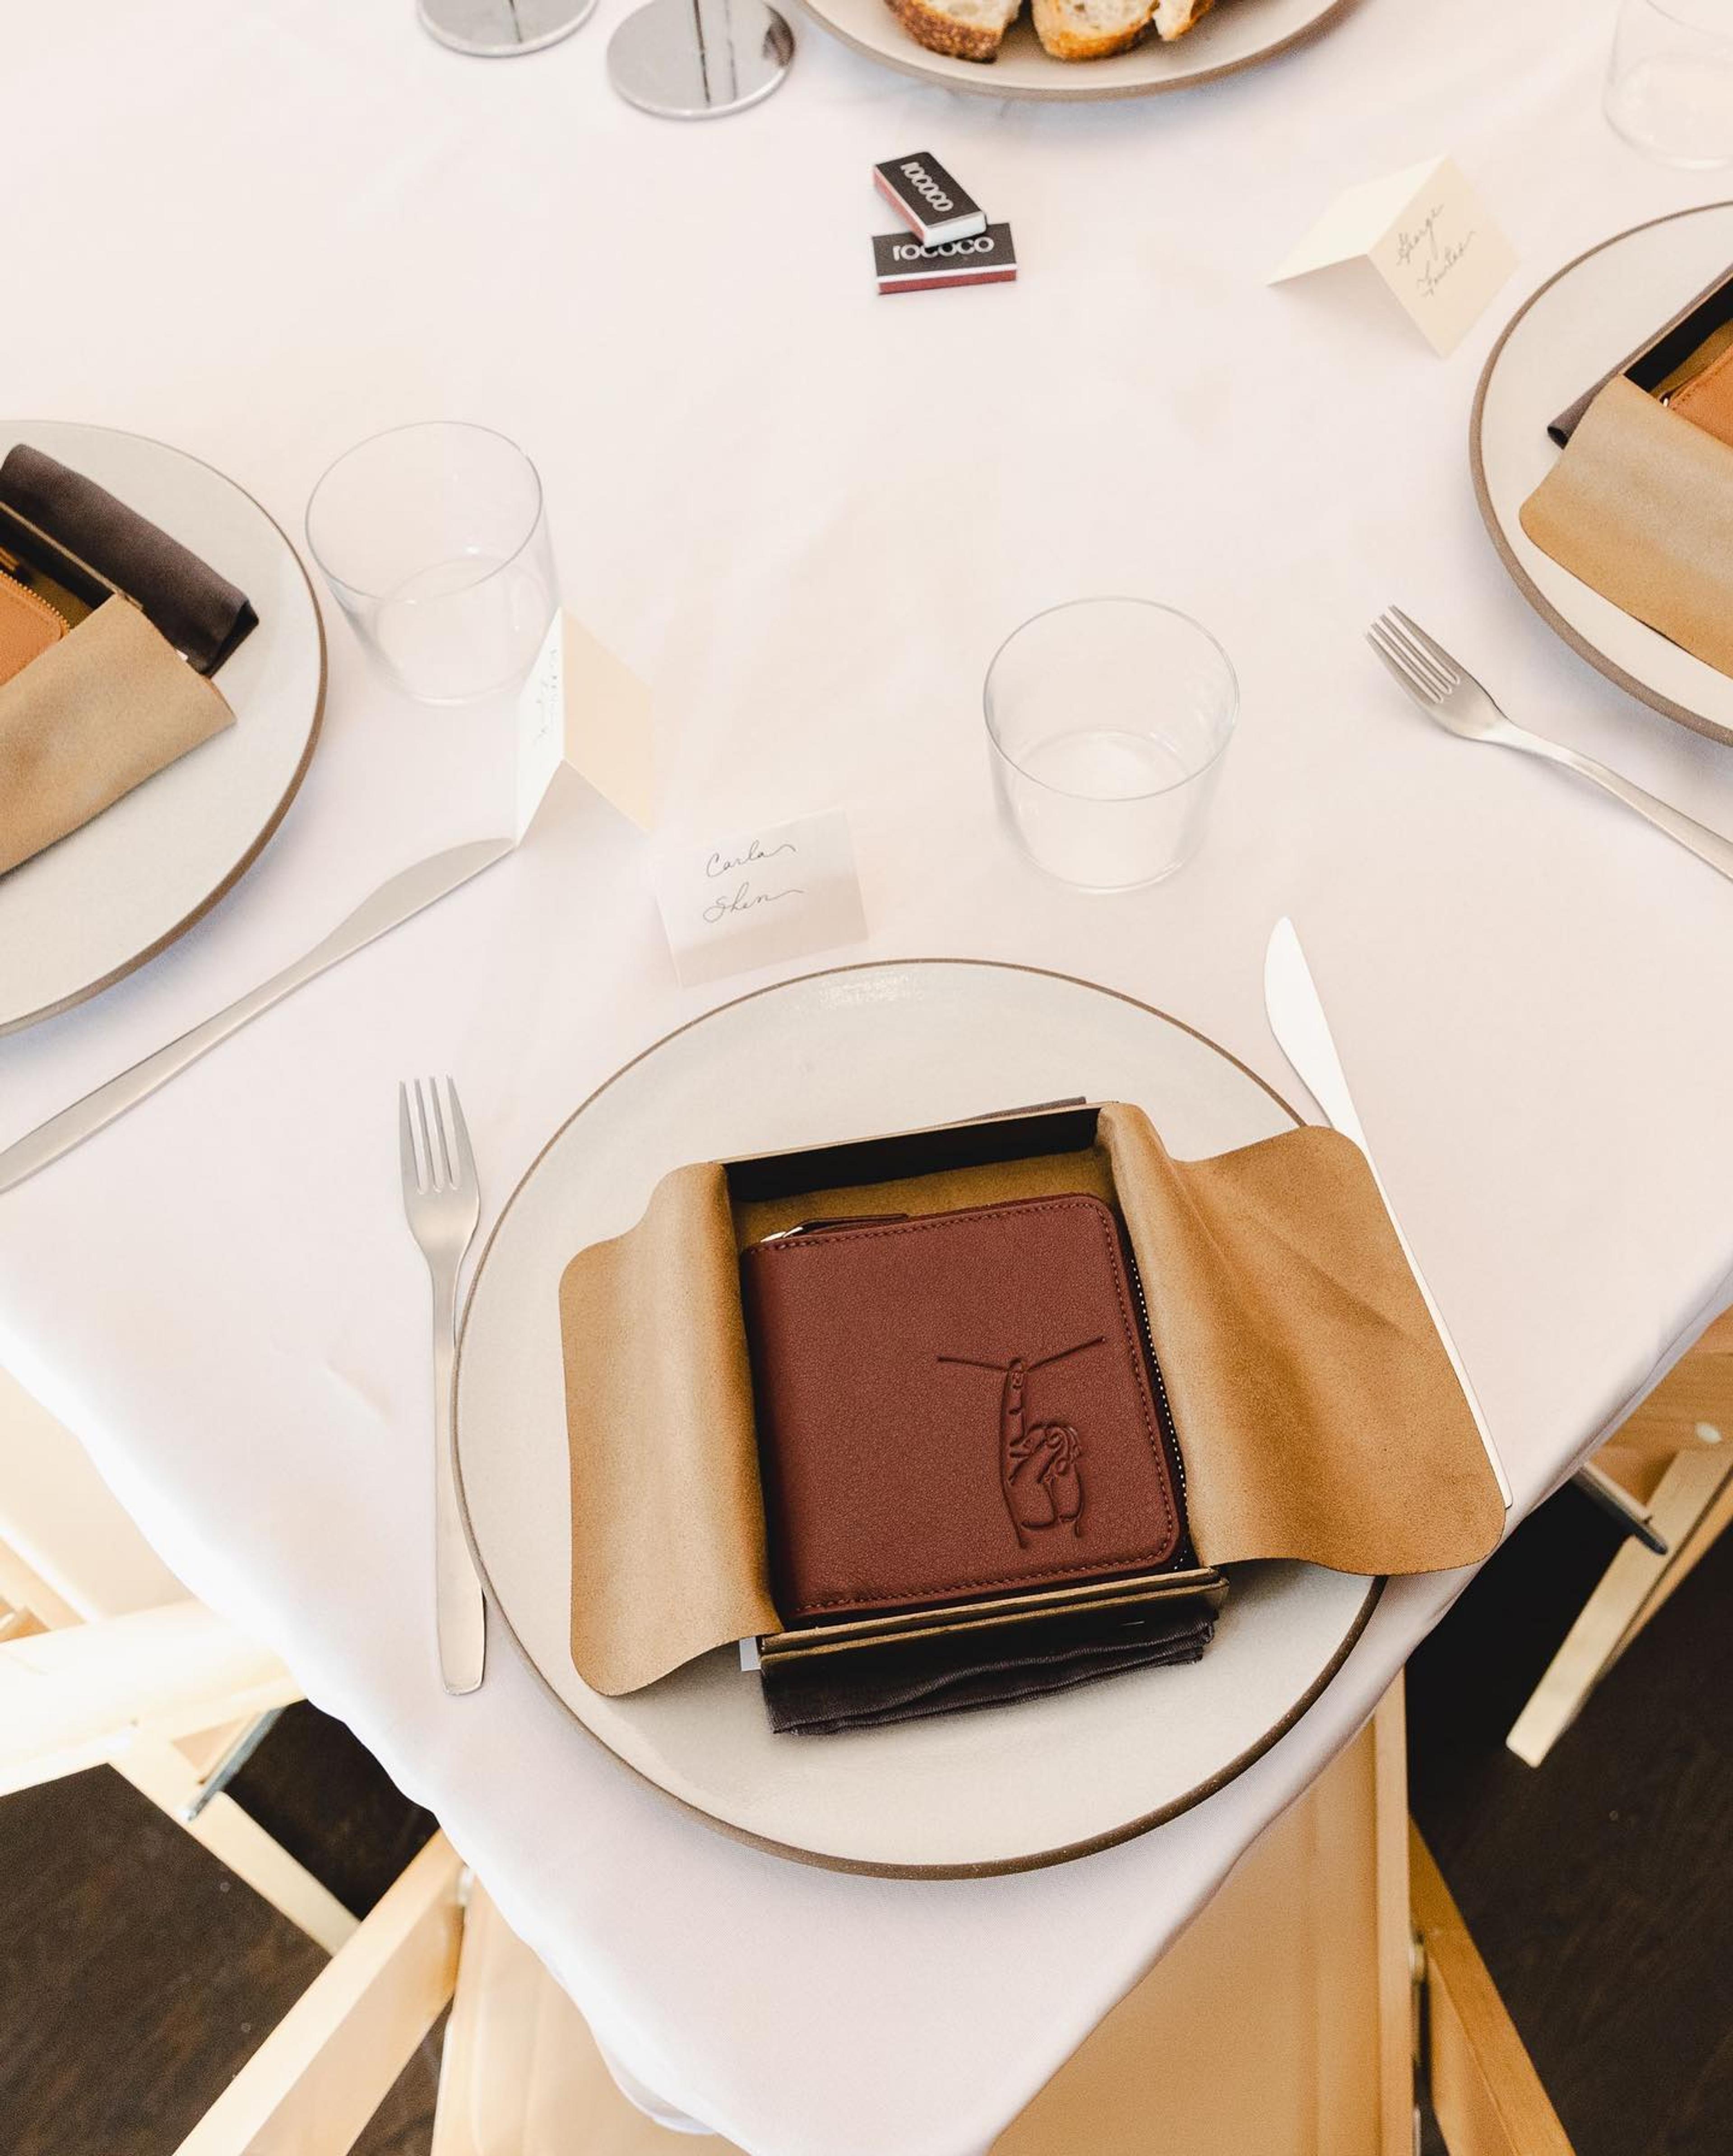 LEATHEROLOGY ON DINNER PARTY PLATE